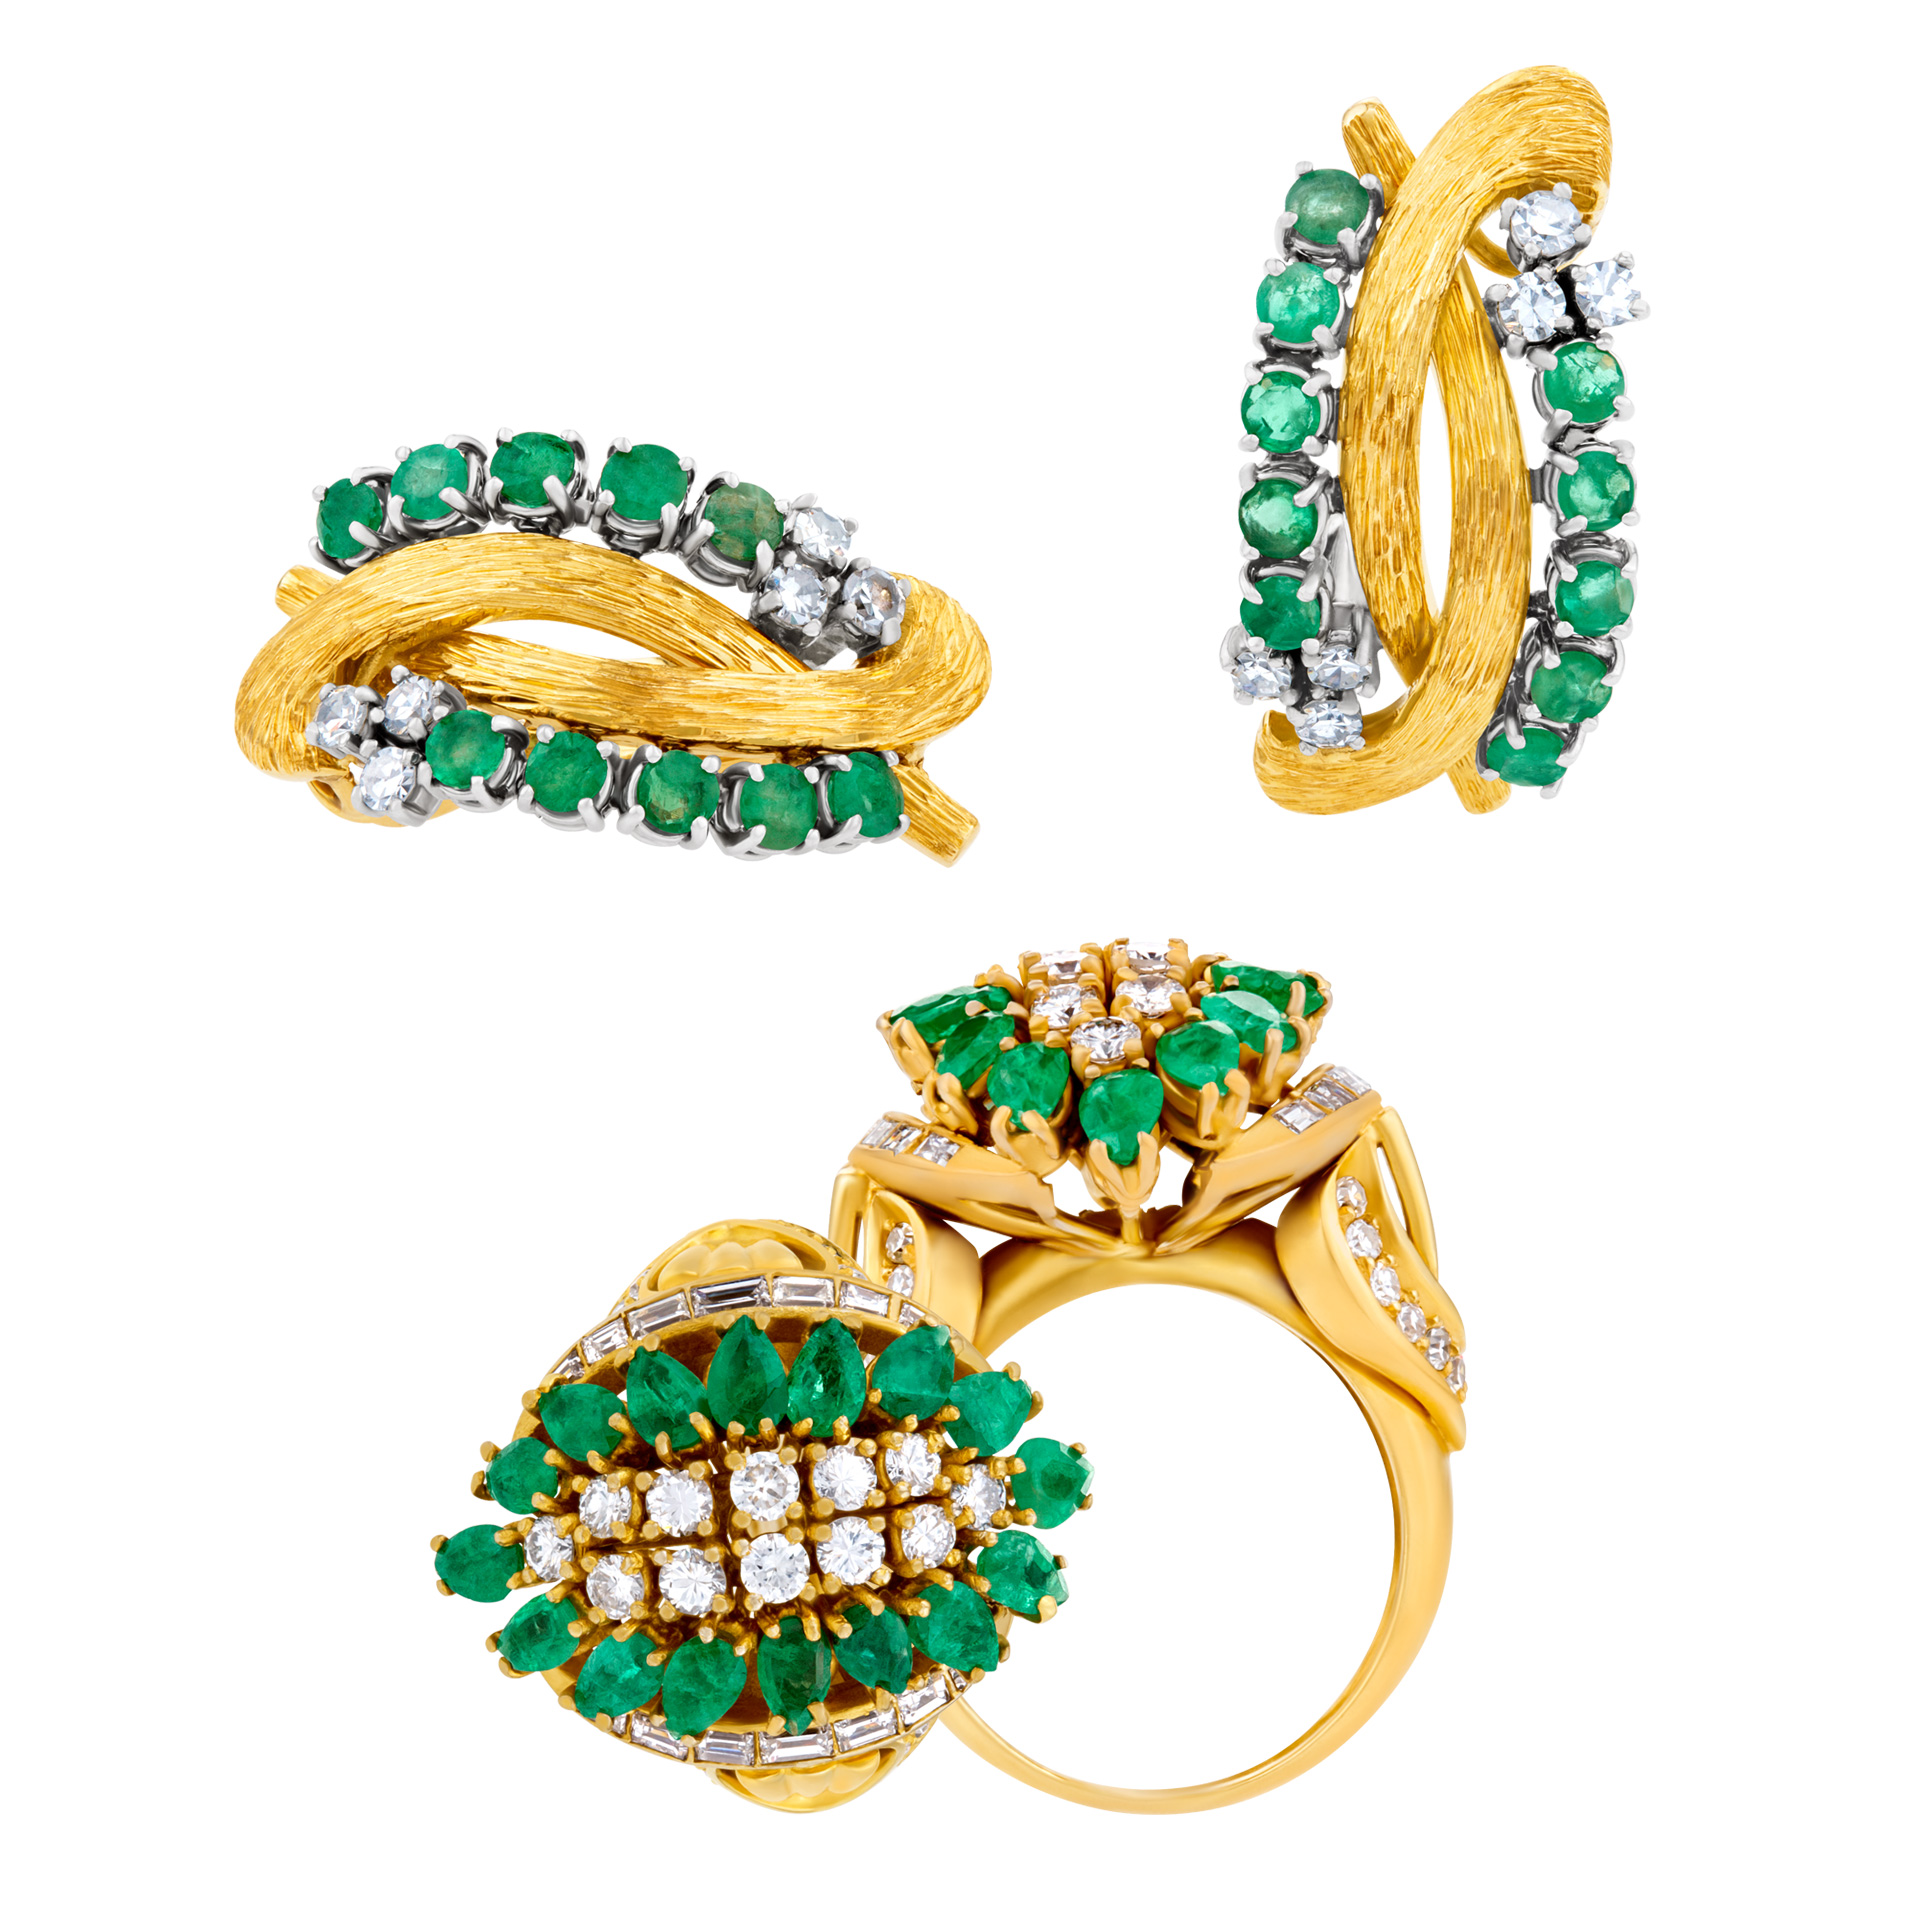 Emerald and diamond ring and earring set in 18k gold. 2.00cts in diamonds